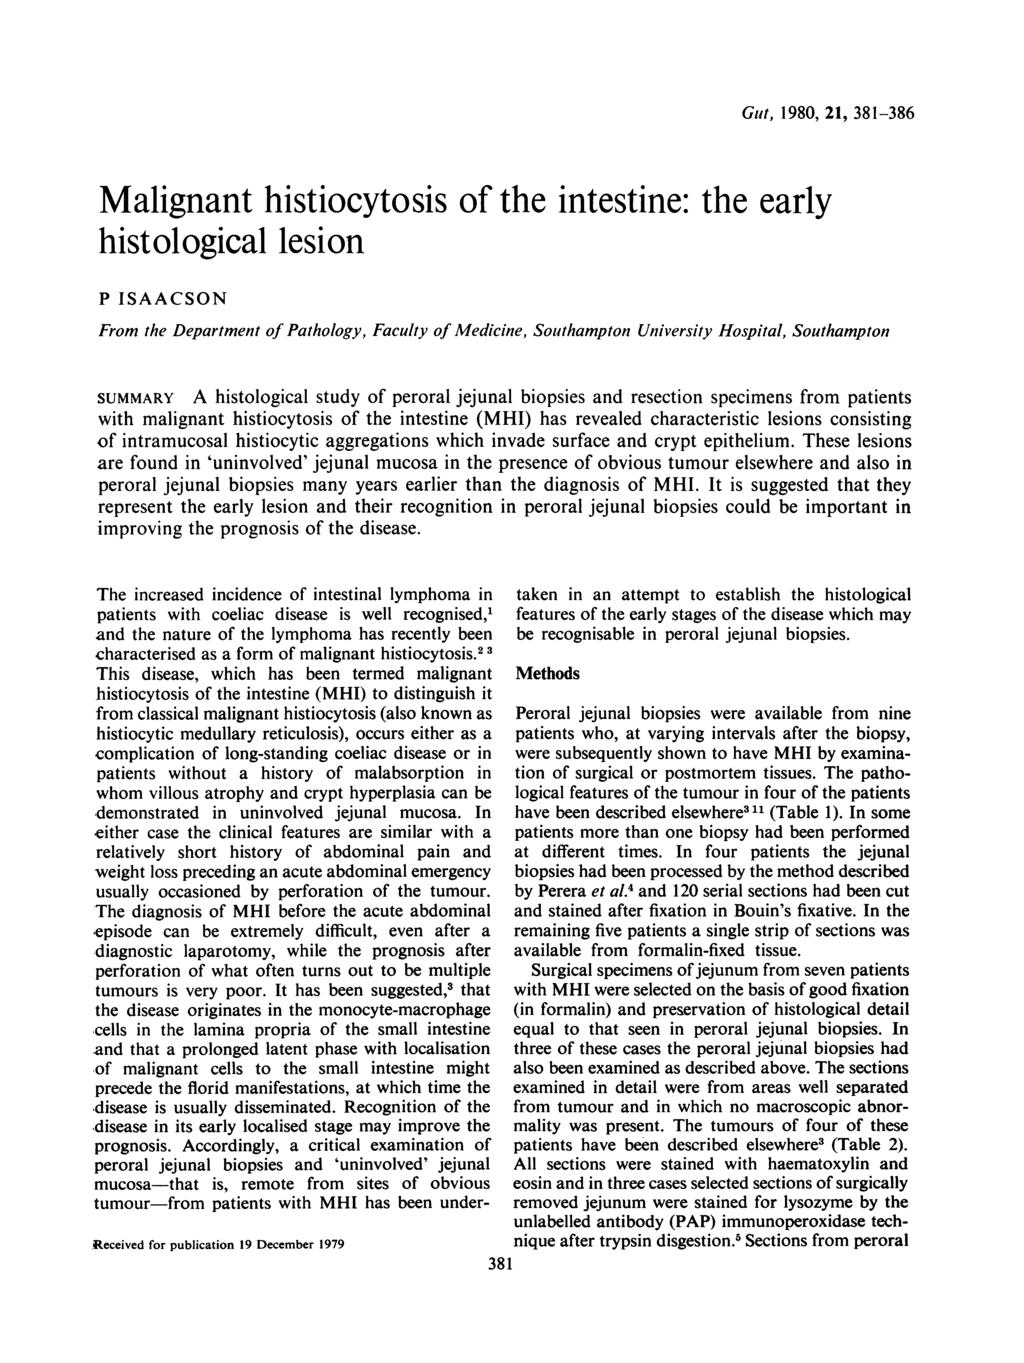 Gut, 1980, 21, 381-386 Malignant histiocytosis of the intestine: the early histological lesion P ISAACSON From the Department of Pathology, Faculty of Medicine, Southampton University Hospital,